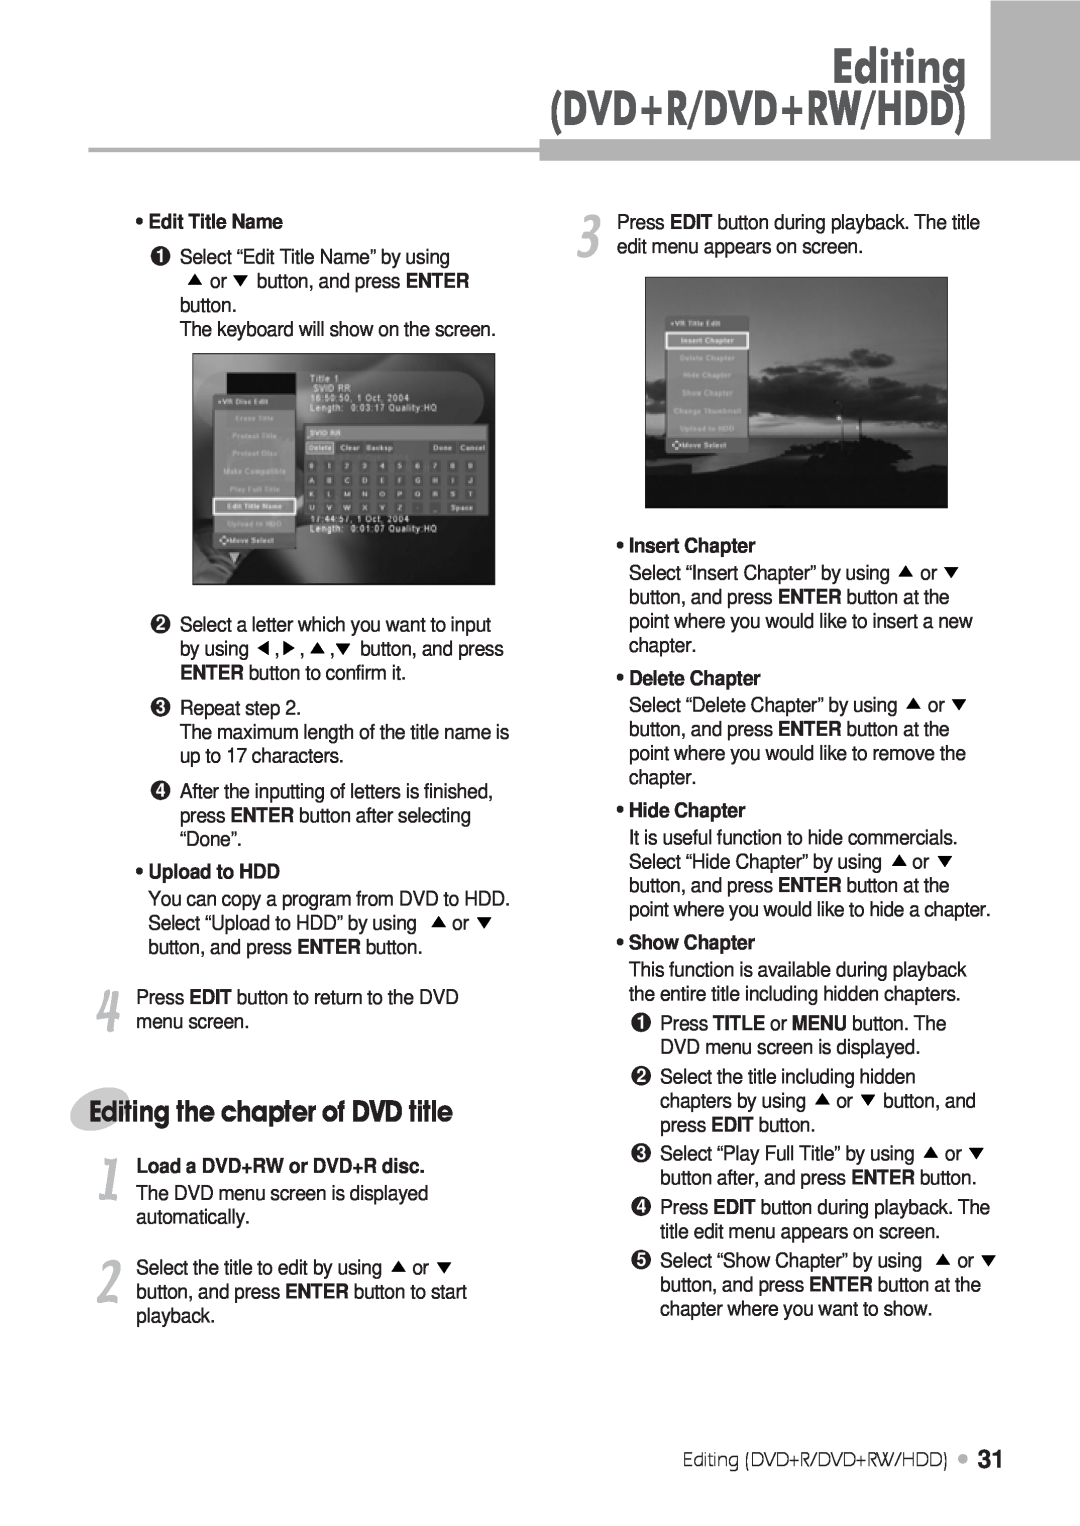 Kodak DRHD-120 manual Editing the chapter of DVD title, Edit Title Name, Insert Chapter, Delete Chapter, Hide Chapter 